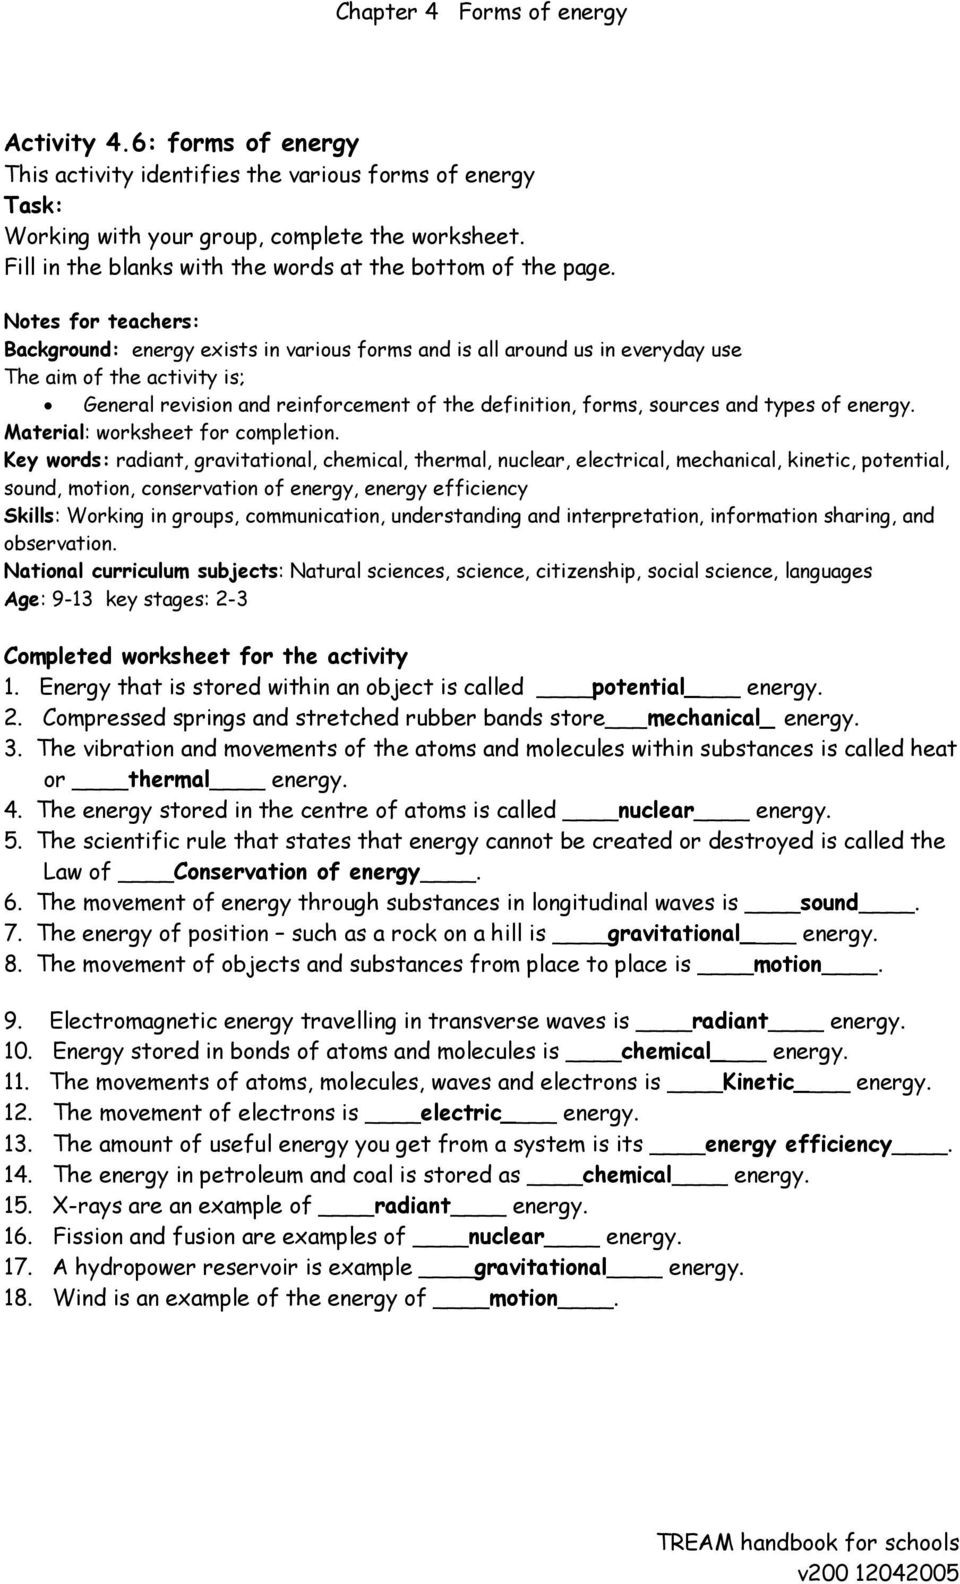 Introduction to Energy Worksheet Chapter 4 forms Of Energy Pdf Free Download